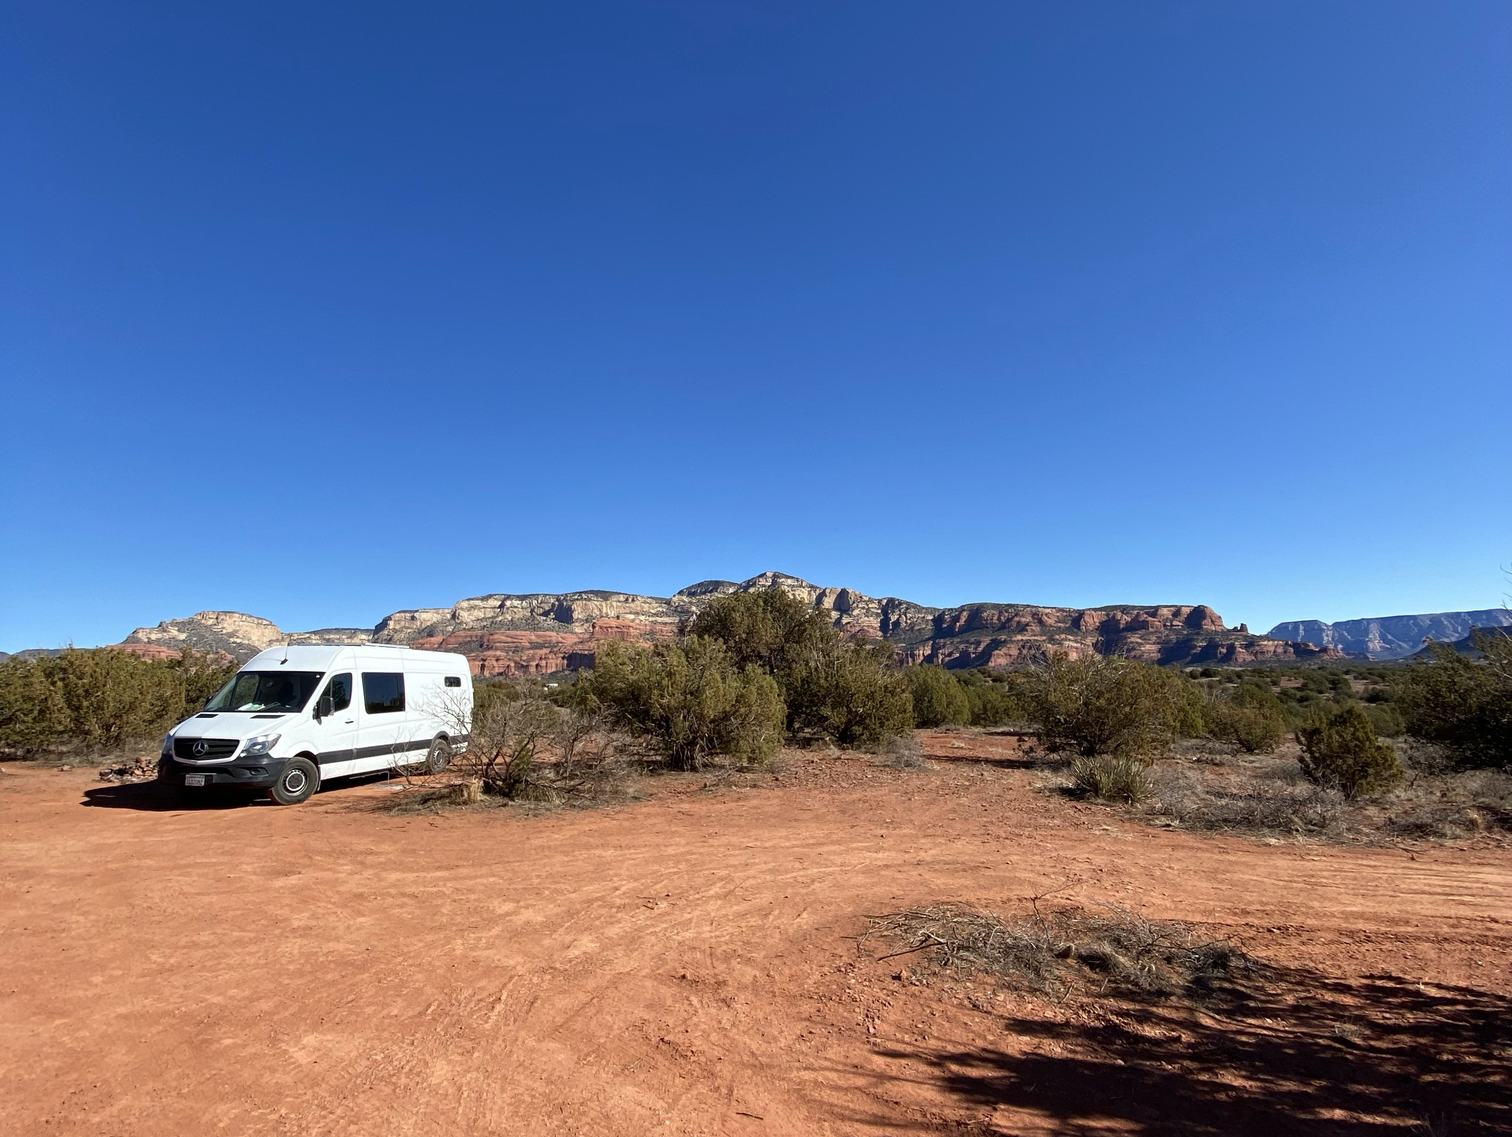 A white van sits in a desert with orange colored sand and a bright blue sky.